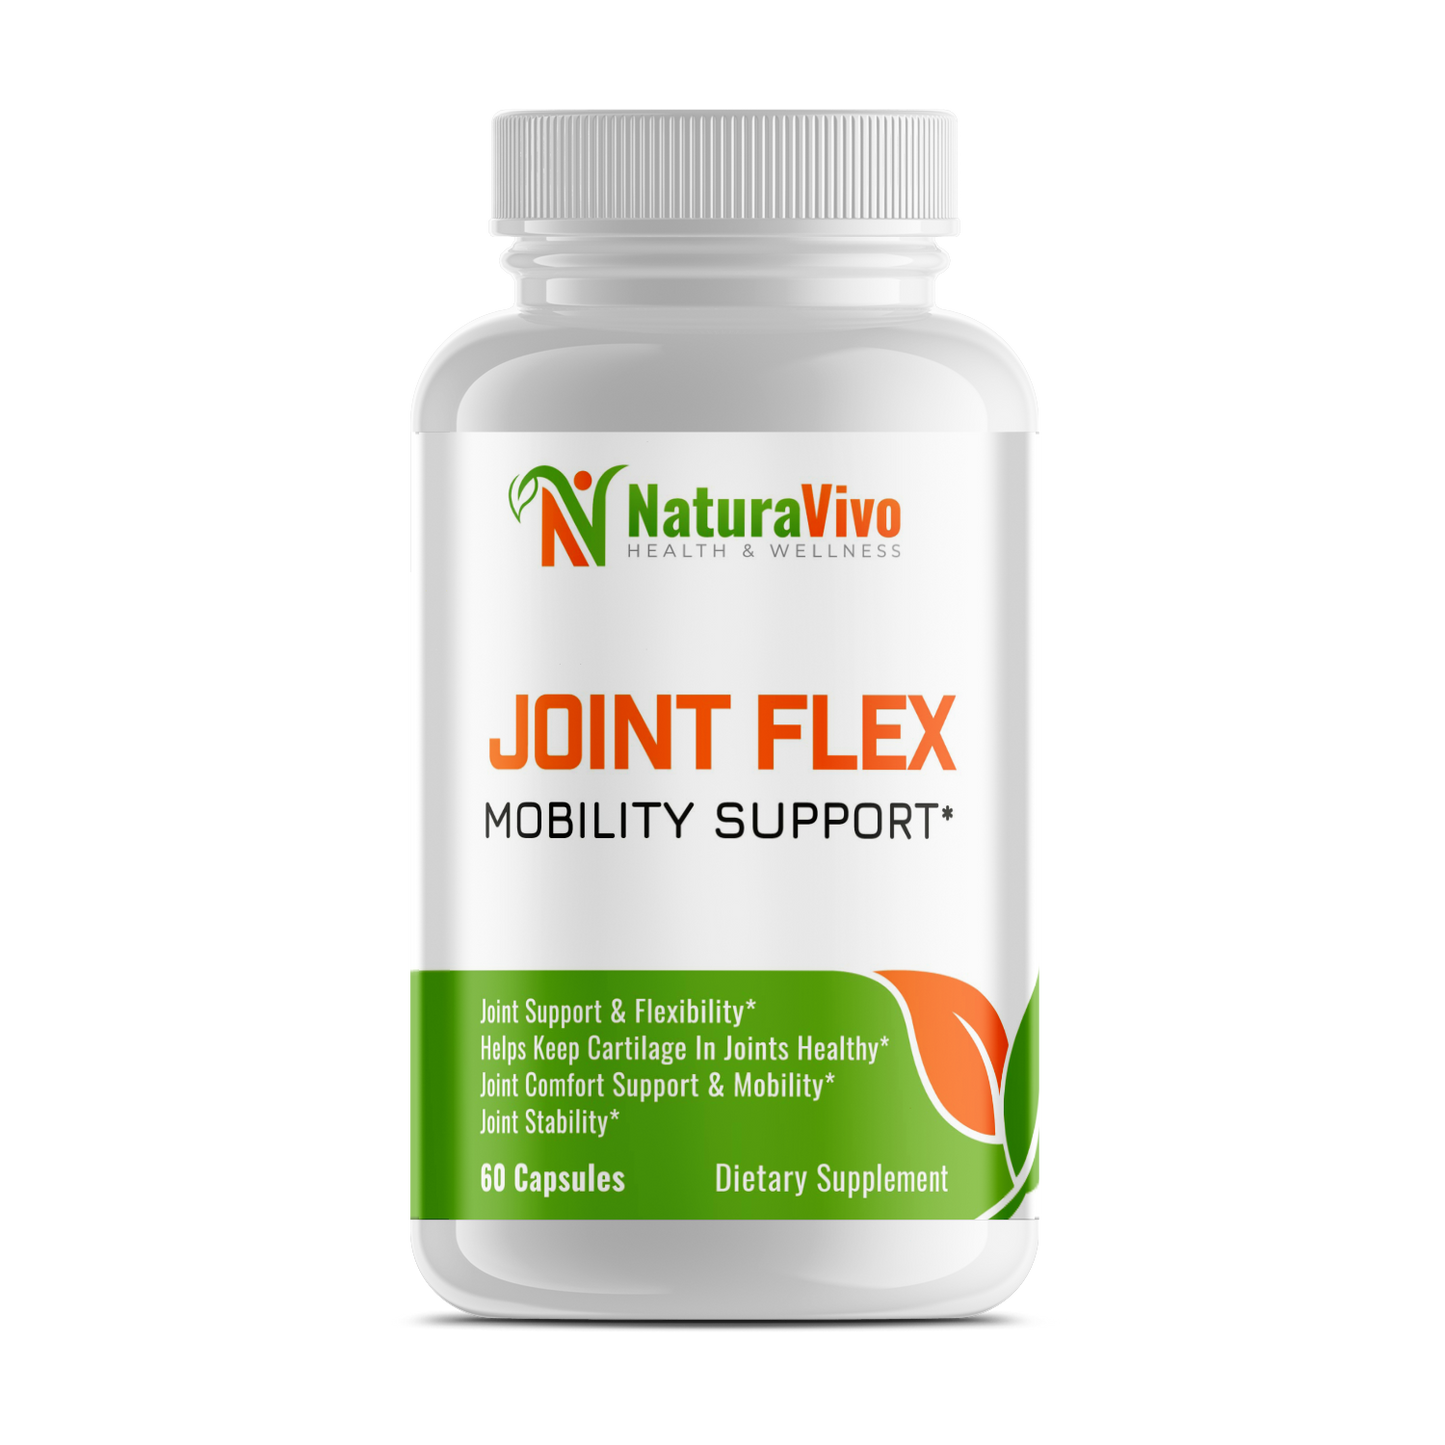 Joint Flex Mobility Support